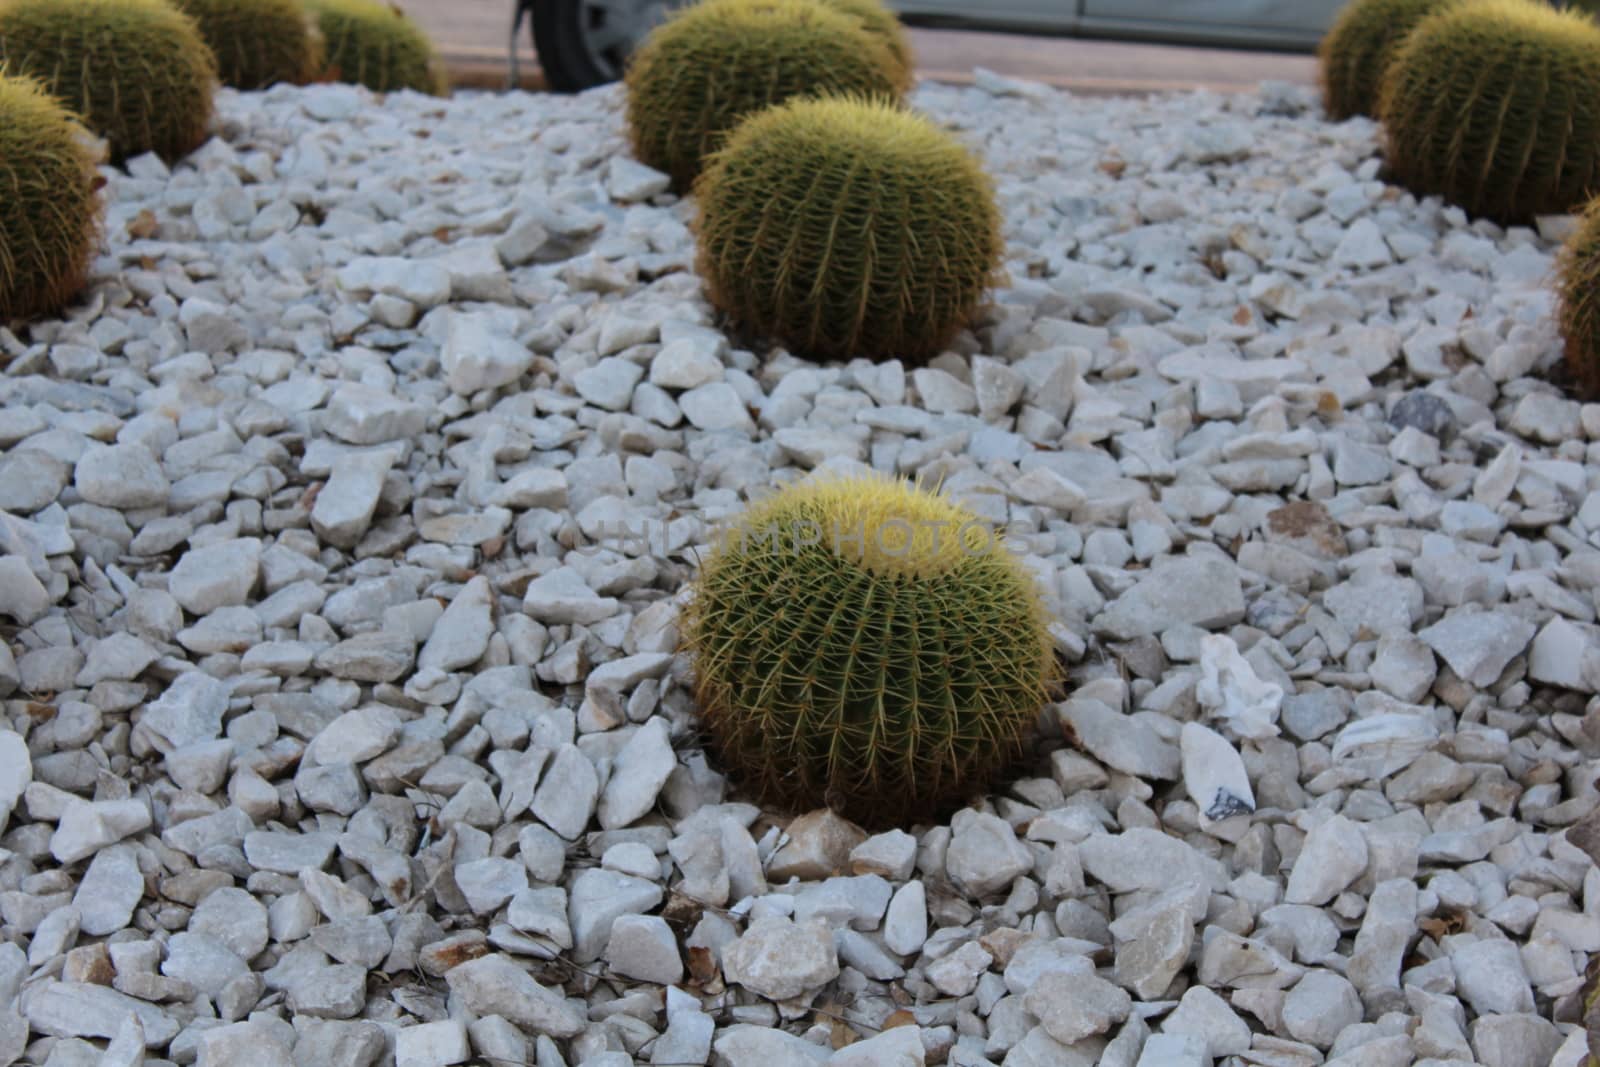 Cacti, with the common name Golden Barrel Cactus or Golden Ball Cactus (species name: Echinocactus grusonii).